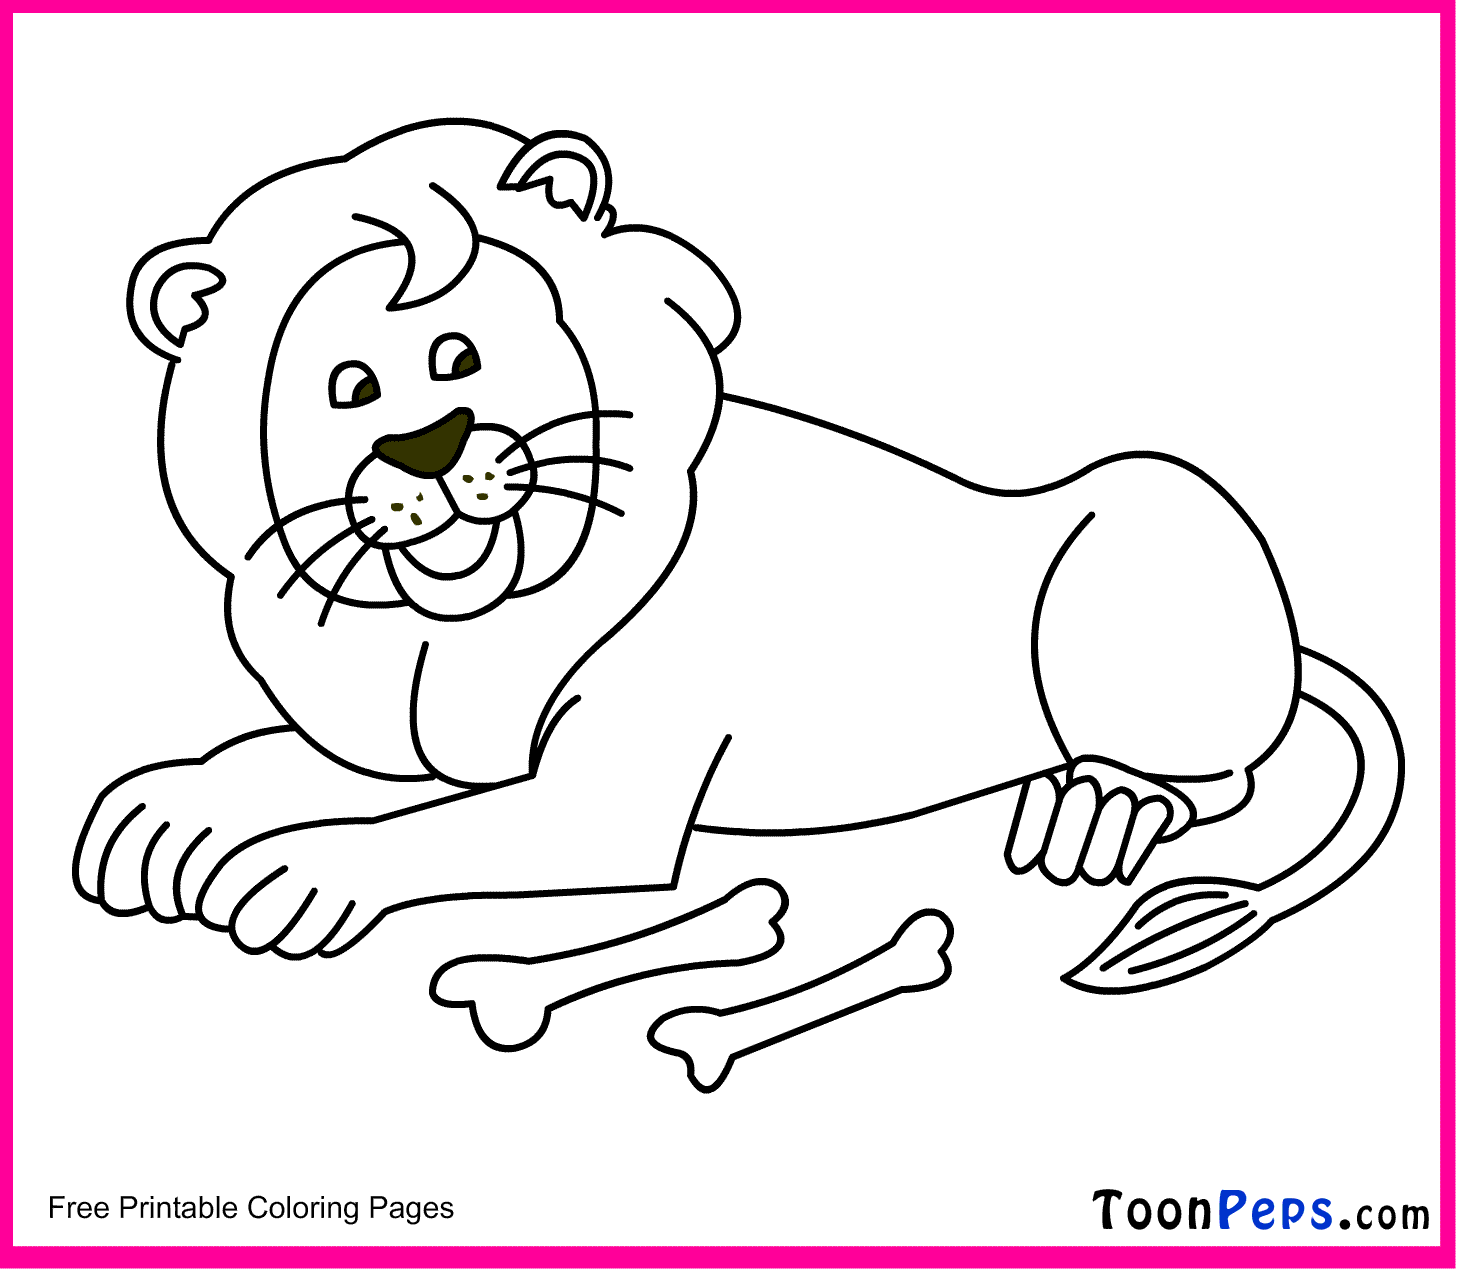 toonpeps : free printable lion coloring pages for kids